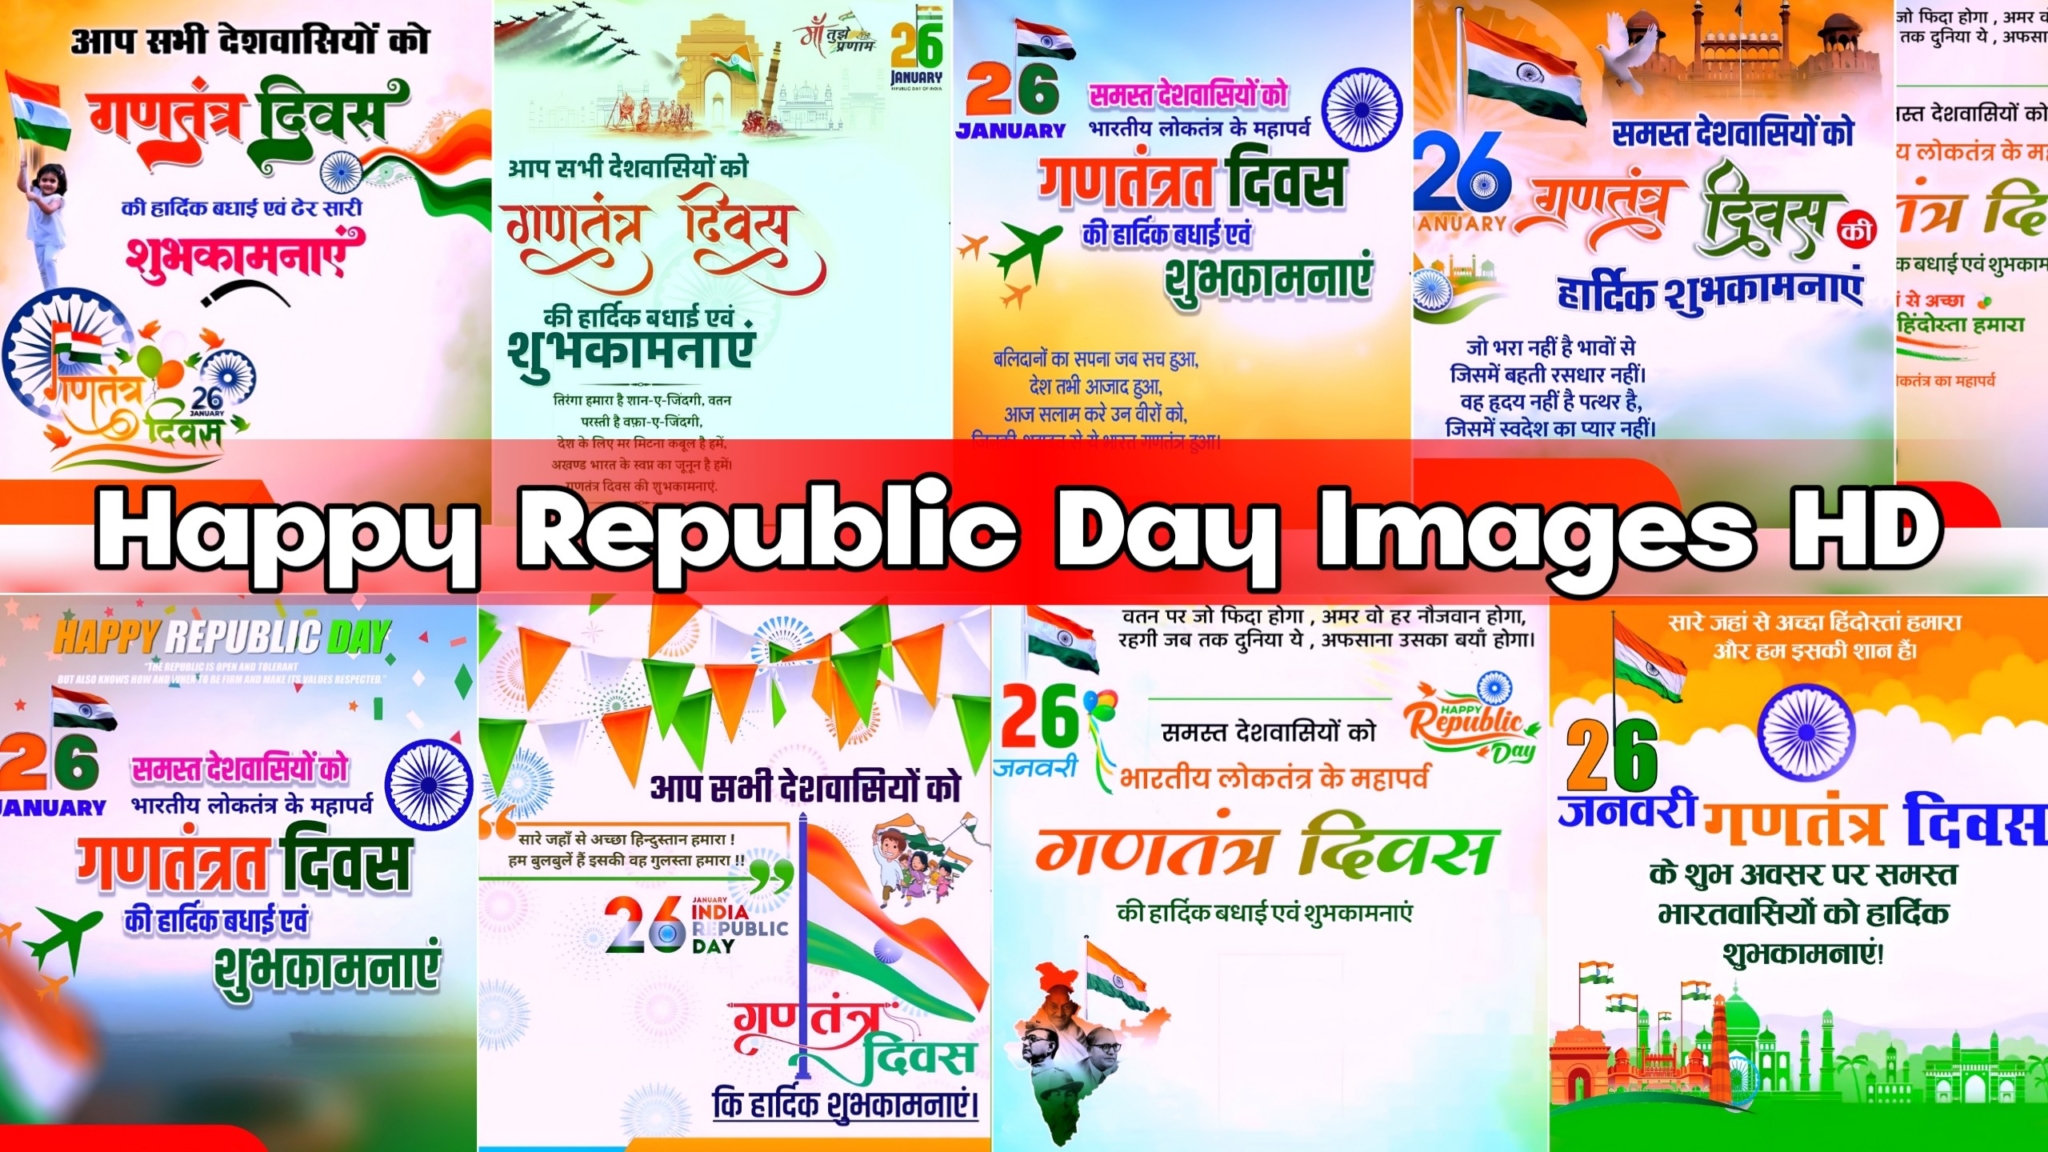 Happy Republic Day Images HD